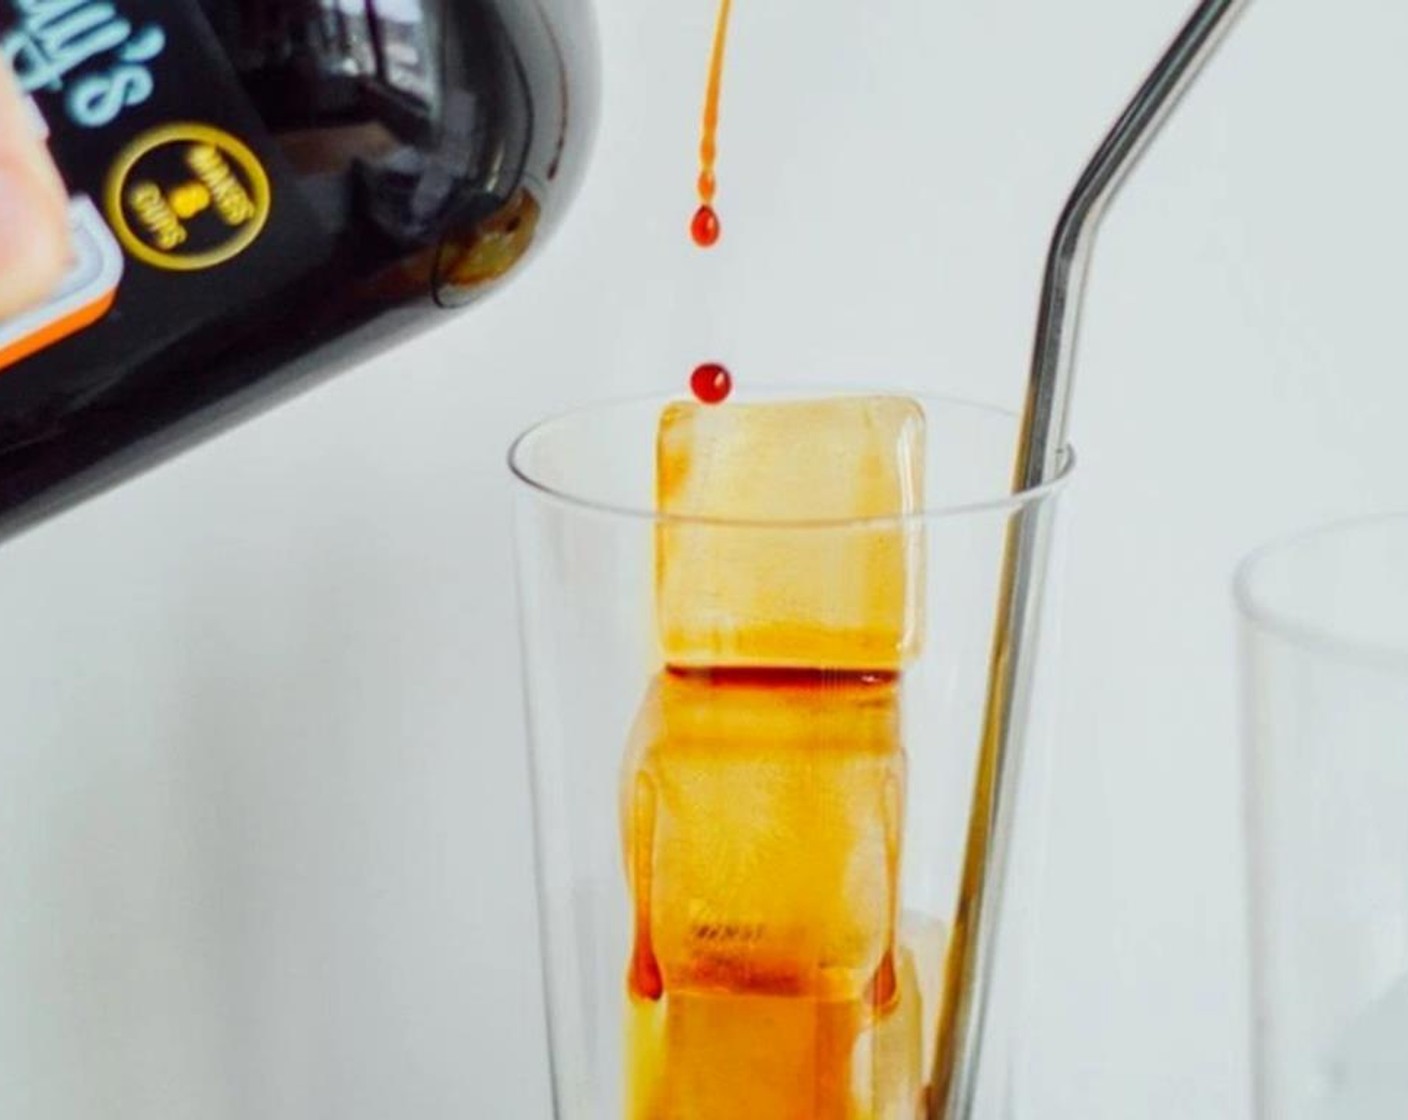 step 2 Fill the glasses with ice. Pour 1/2 cup of Cold Brew Concentrate (1 cup) in each glass.